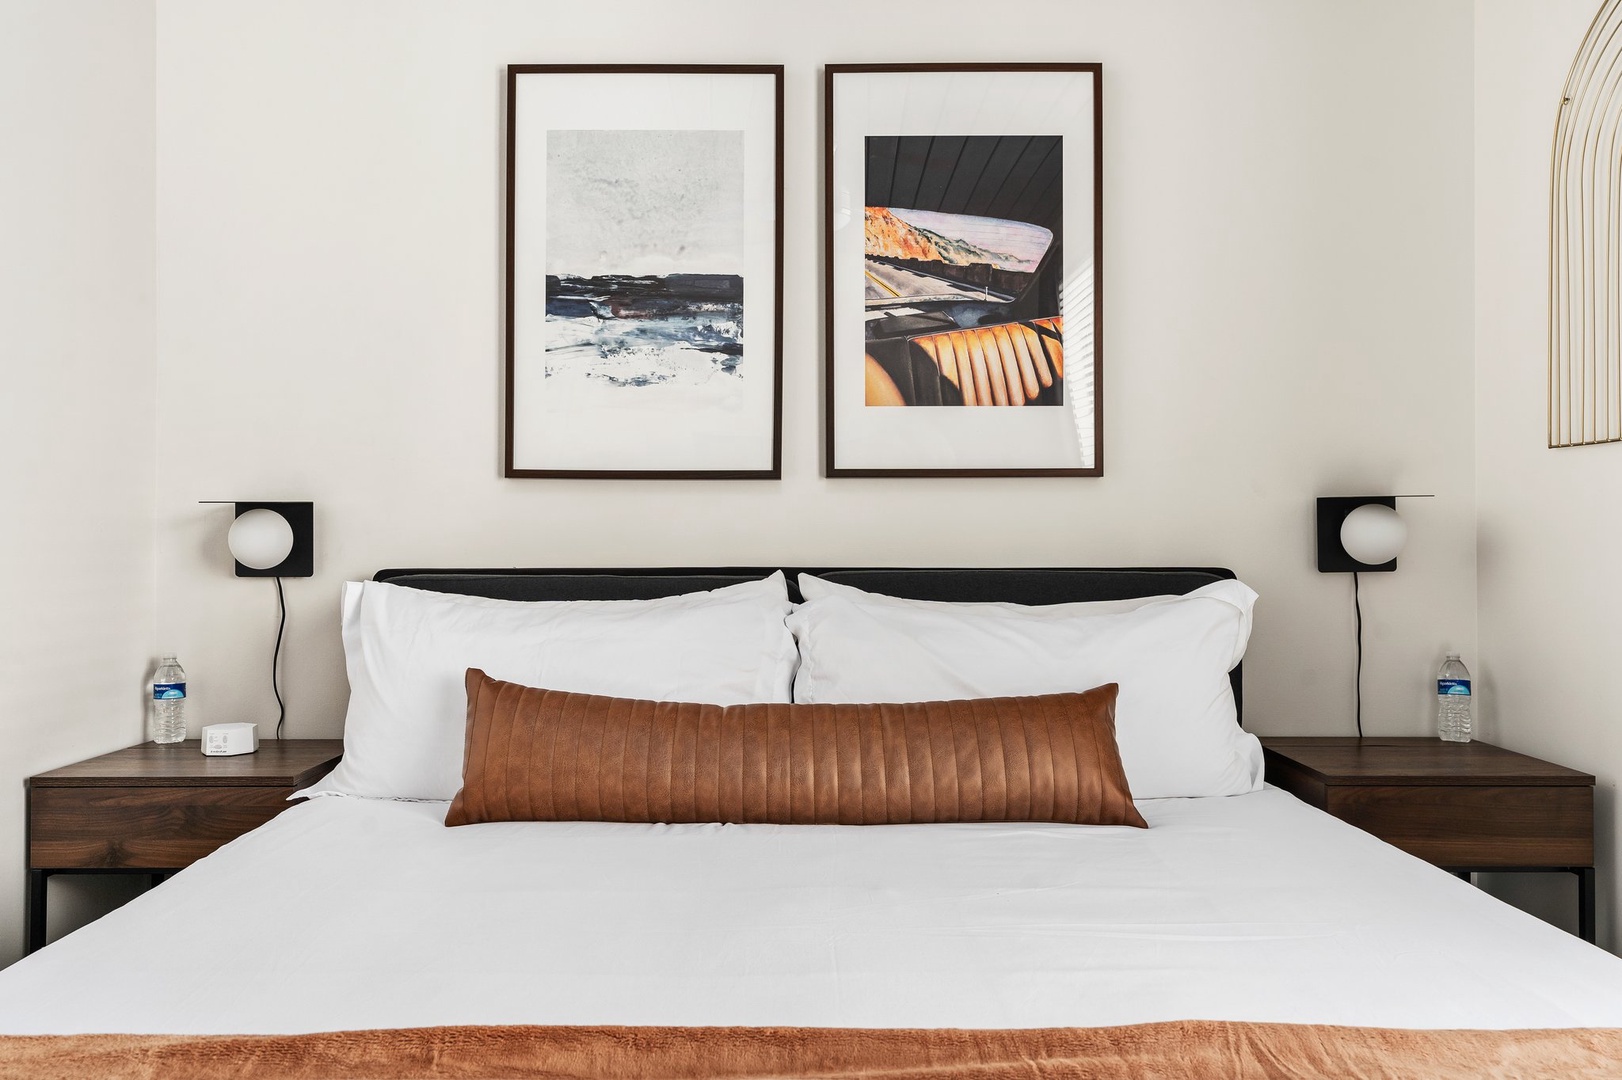 Get a great night’s sleep in our comfortable king-size bed with a memory foam mattress, soft sheets, cozy pillows, blackout curtains, and a white noise machine